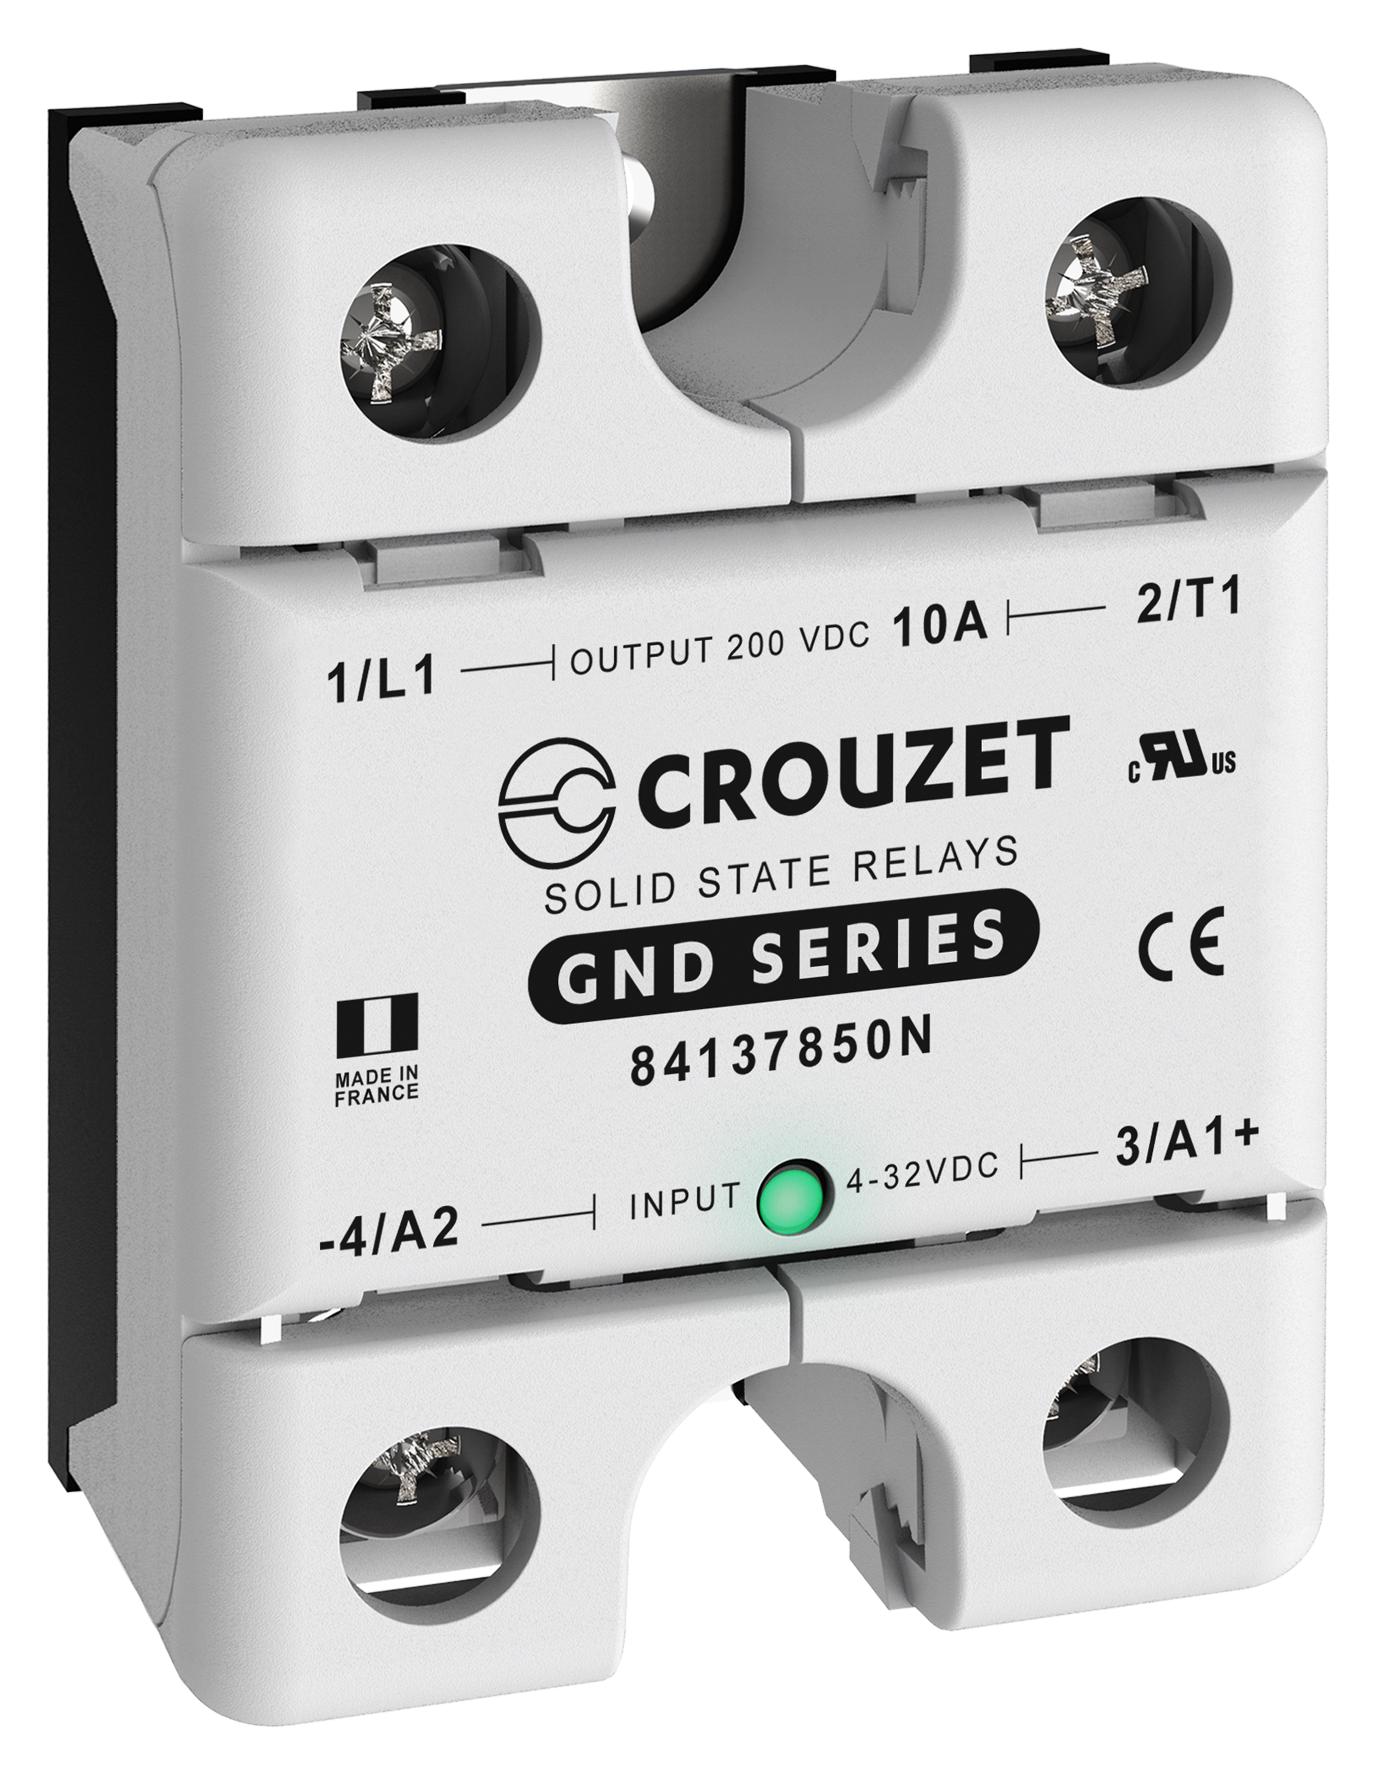 84137850N SOLID STATE RELAY/10A/5-200VDC, PANEL CROUZET